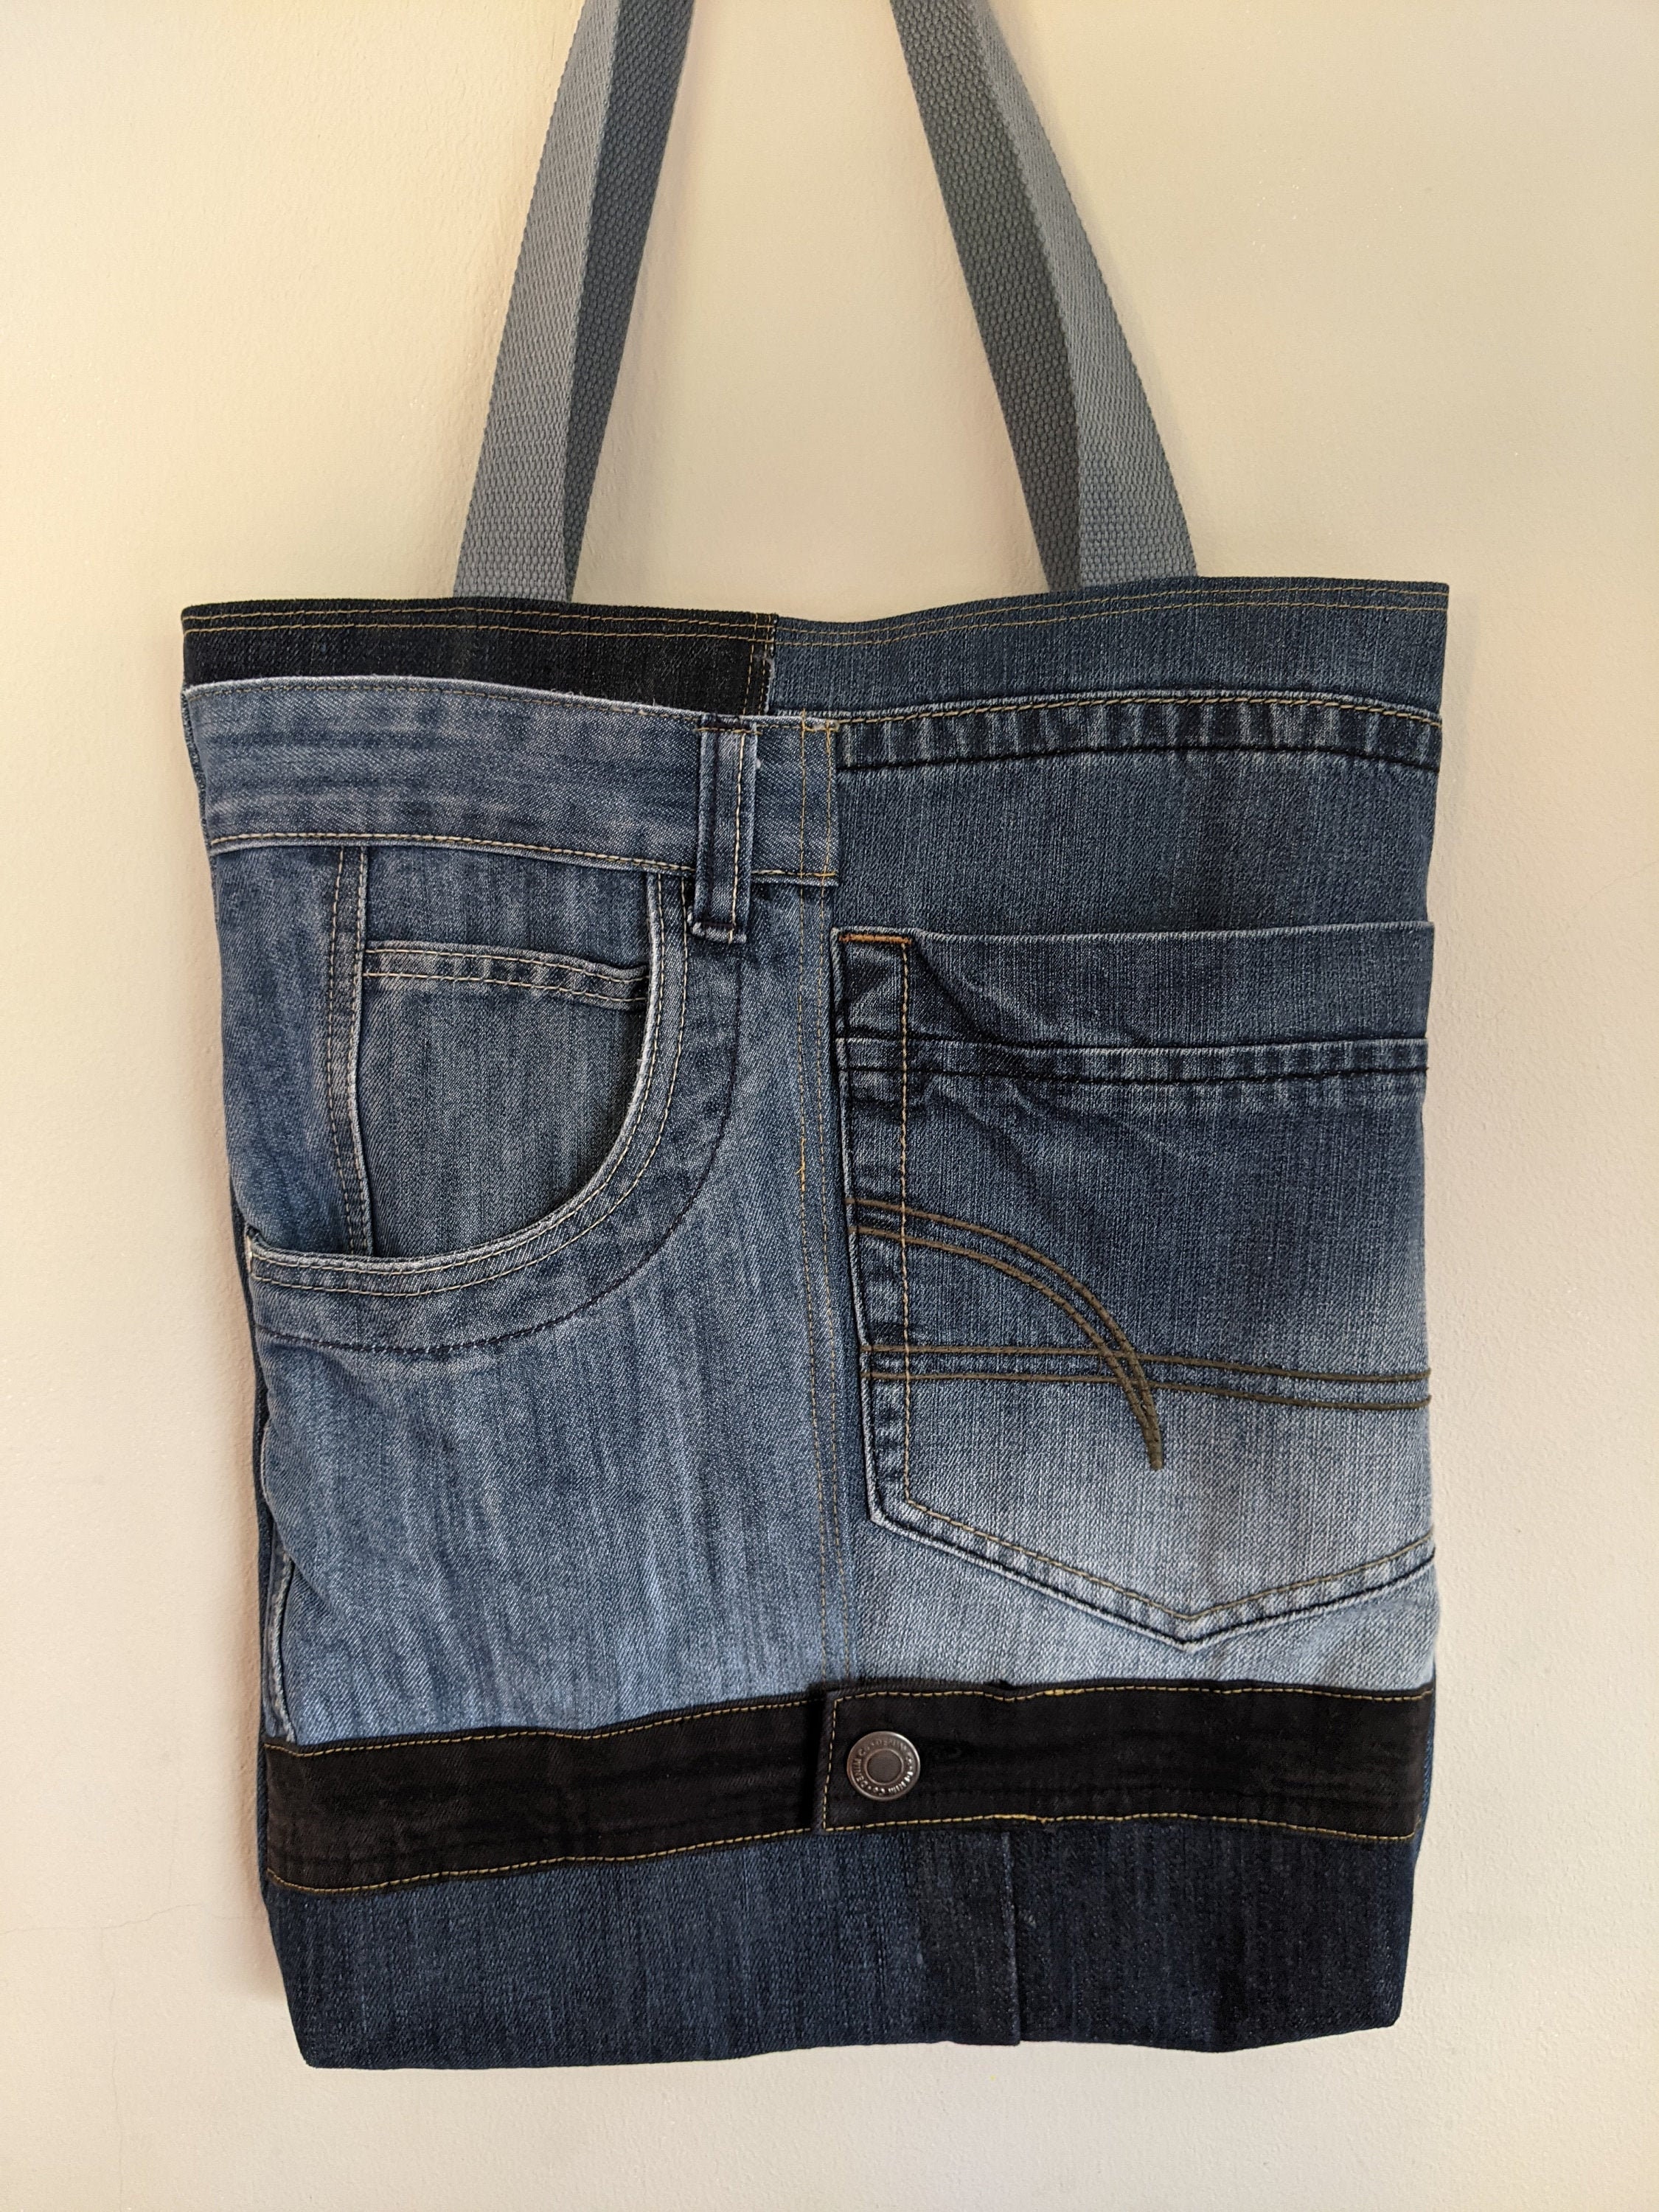 Upcycled denim shopping bag. Made from recycled jeans. Ideal | Etsy